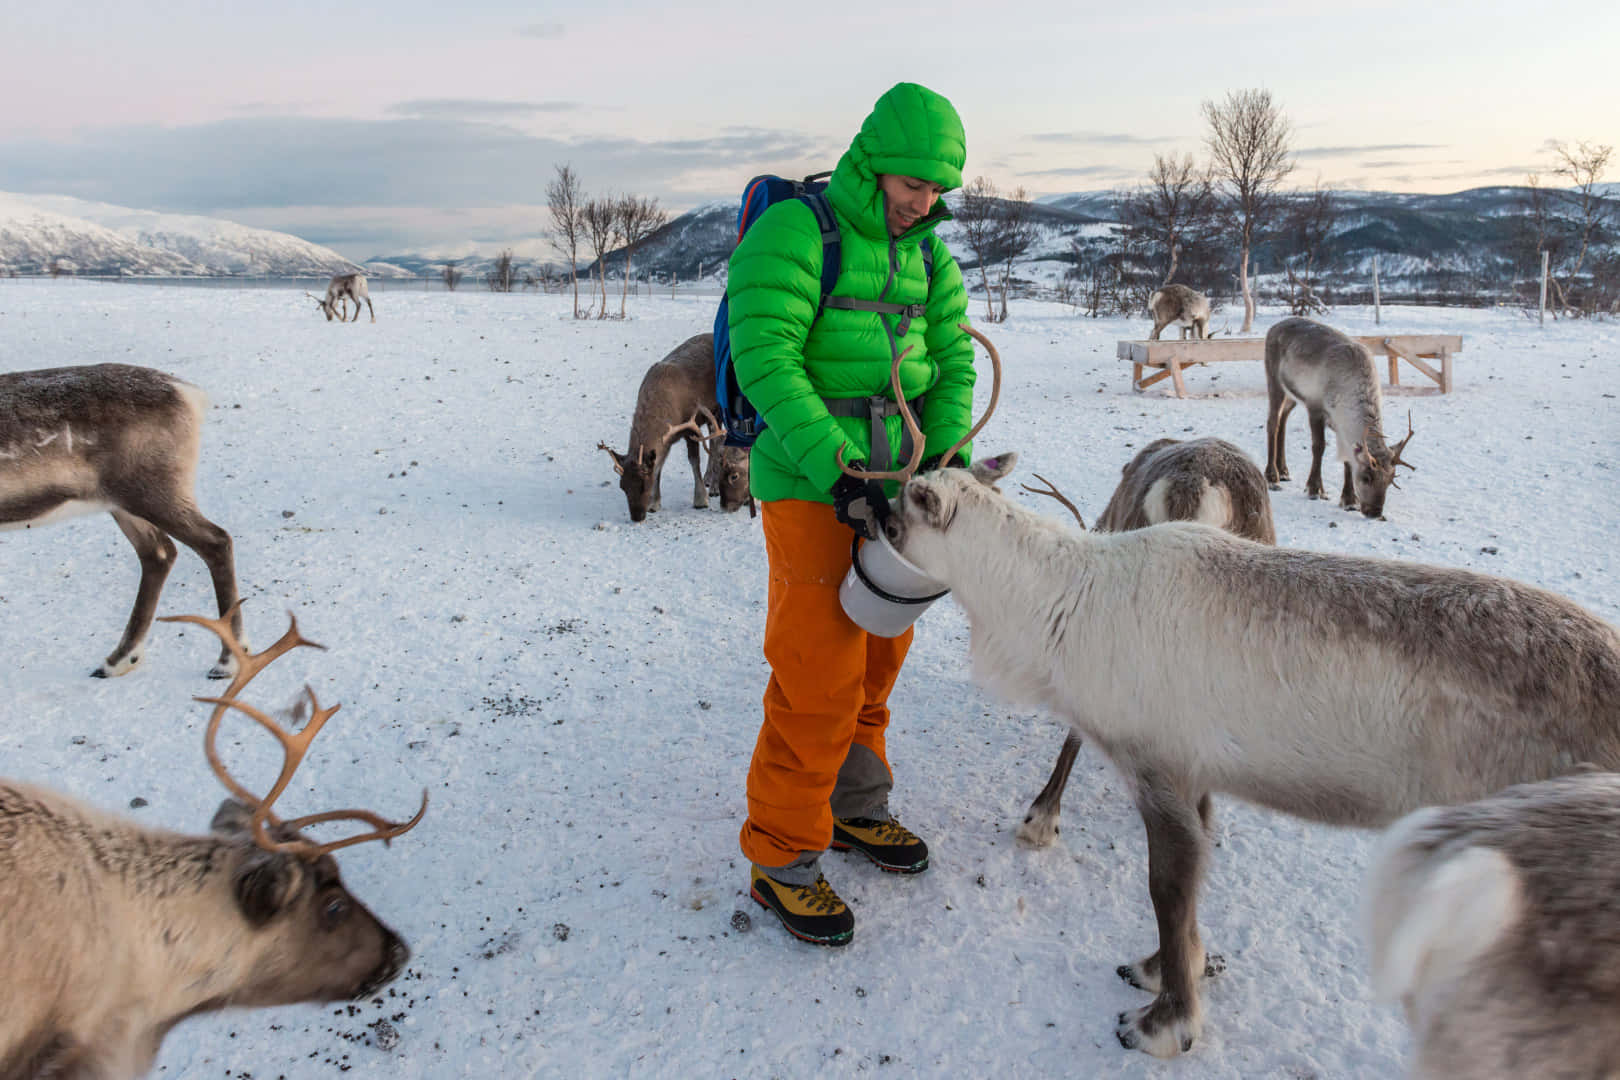 Reviving the Spirit of Christmas with Reindeer